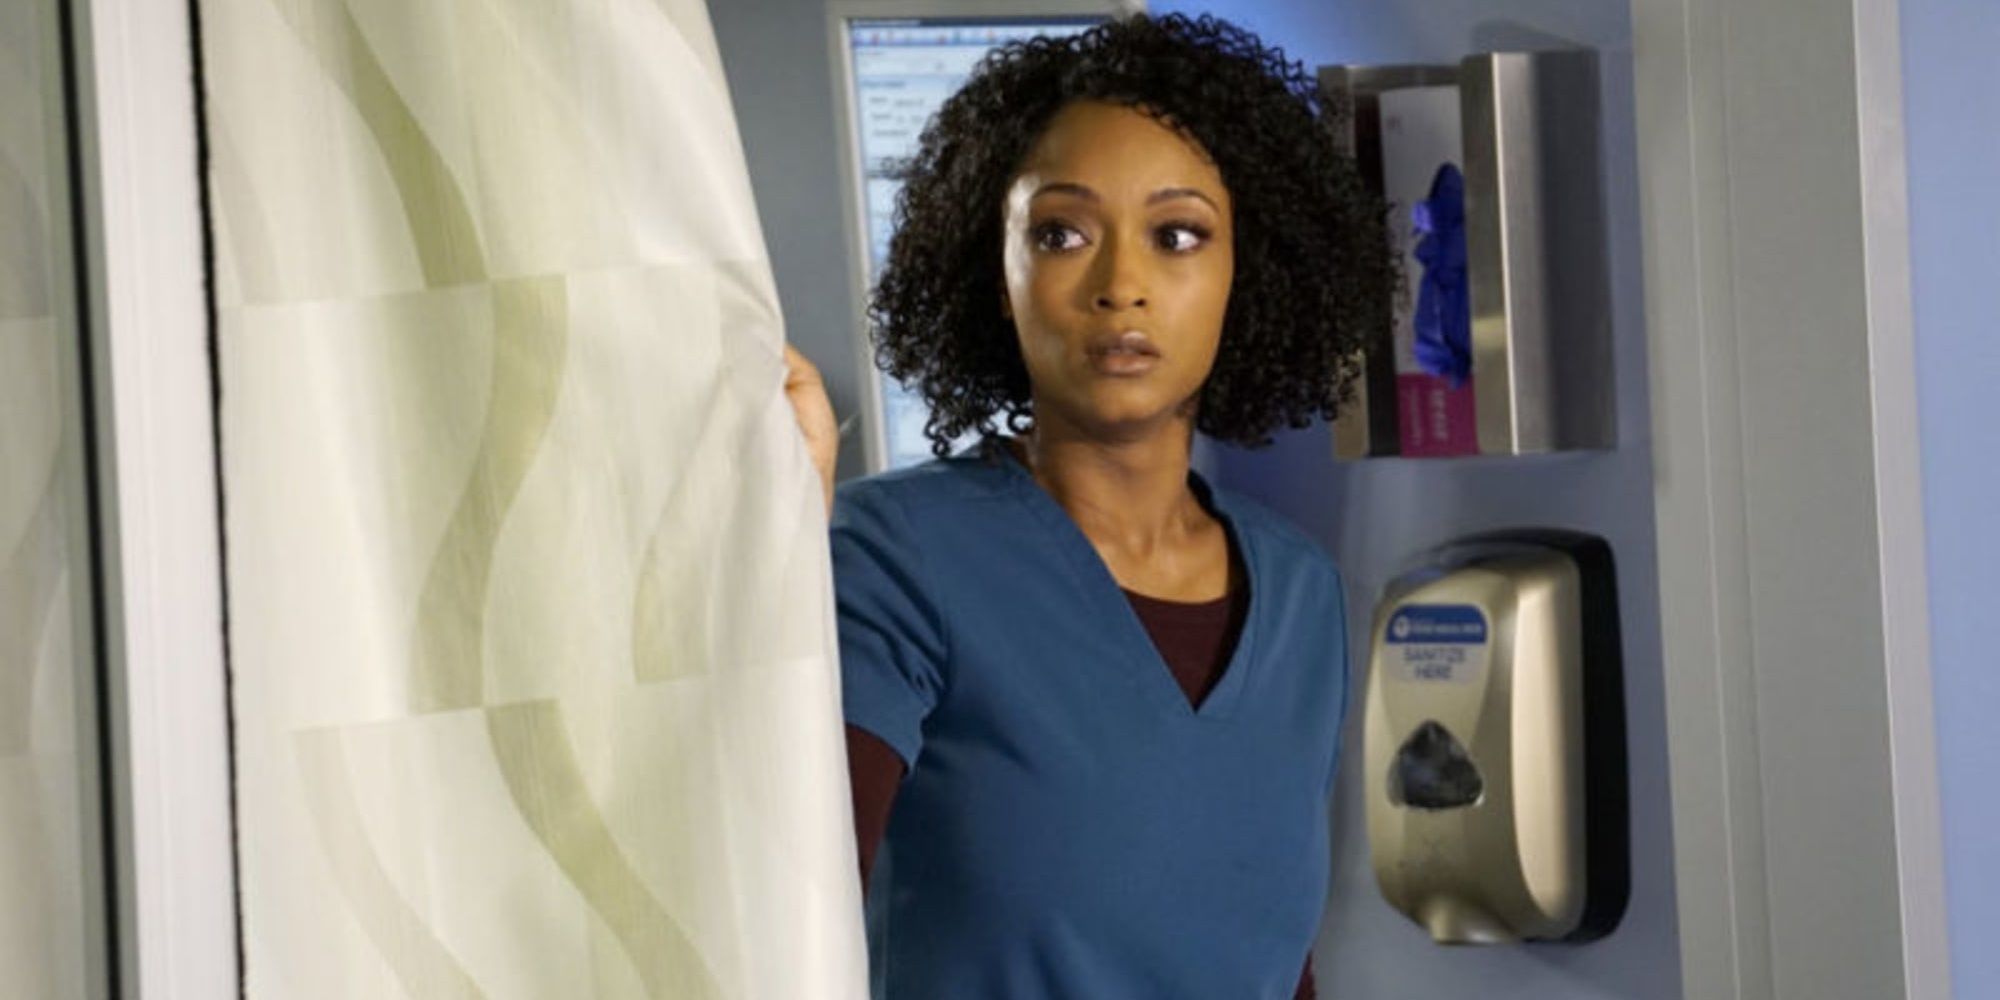 April closes a privacy curtain in Chicago Med episode &quot;Never Let You Go&quot;